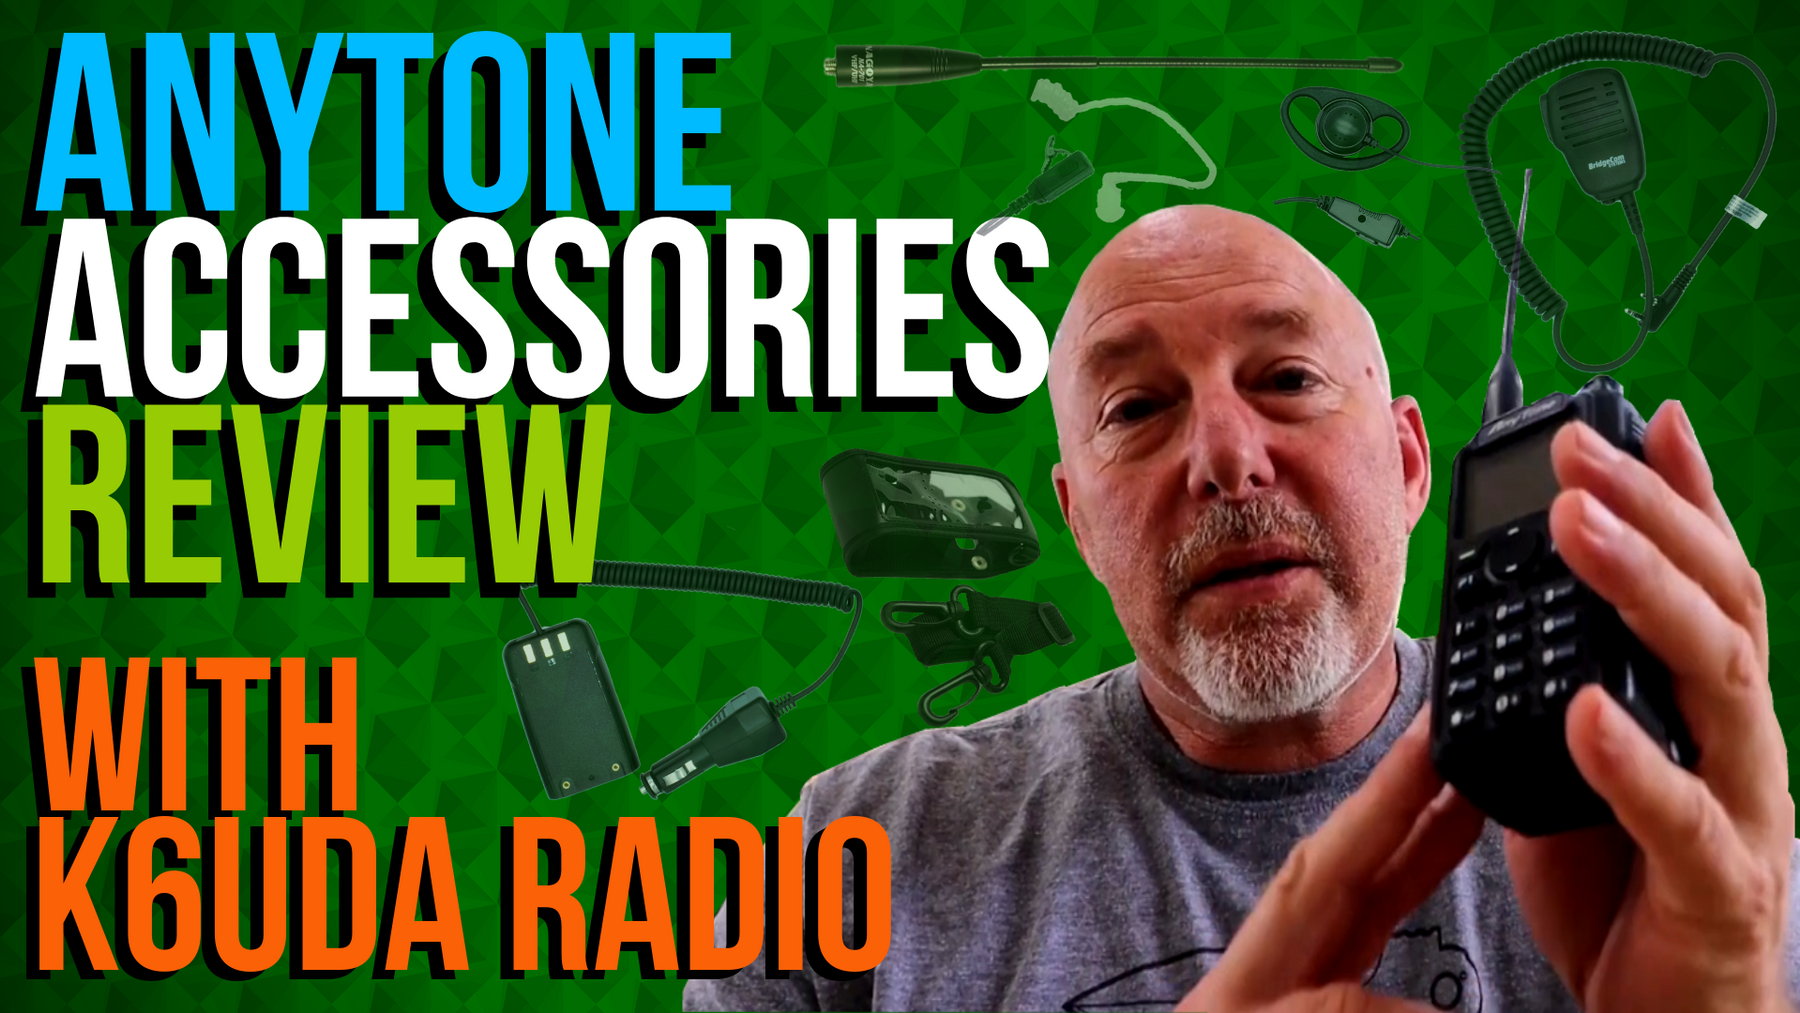 AnyTone Accessories Review with Bob, from K6UDA Radio